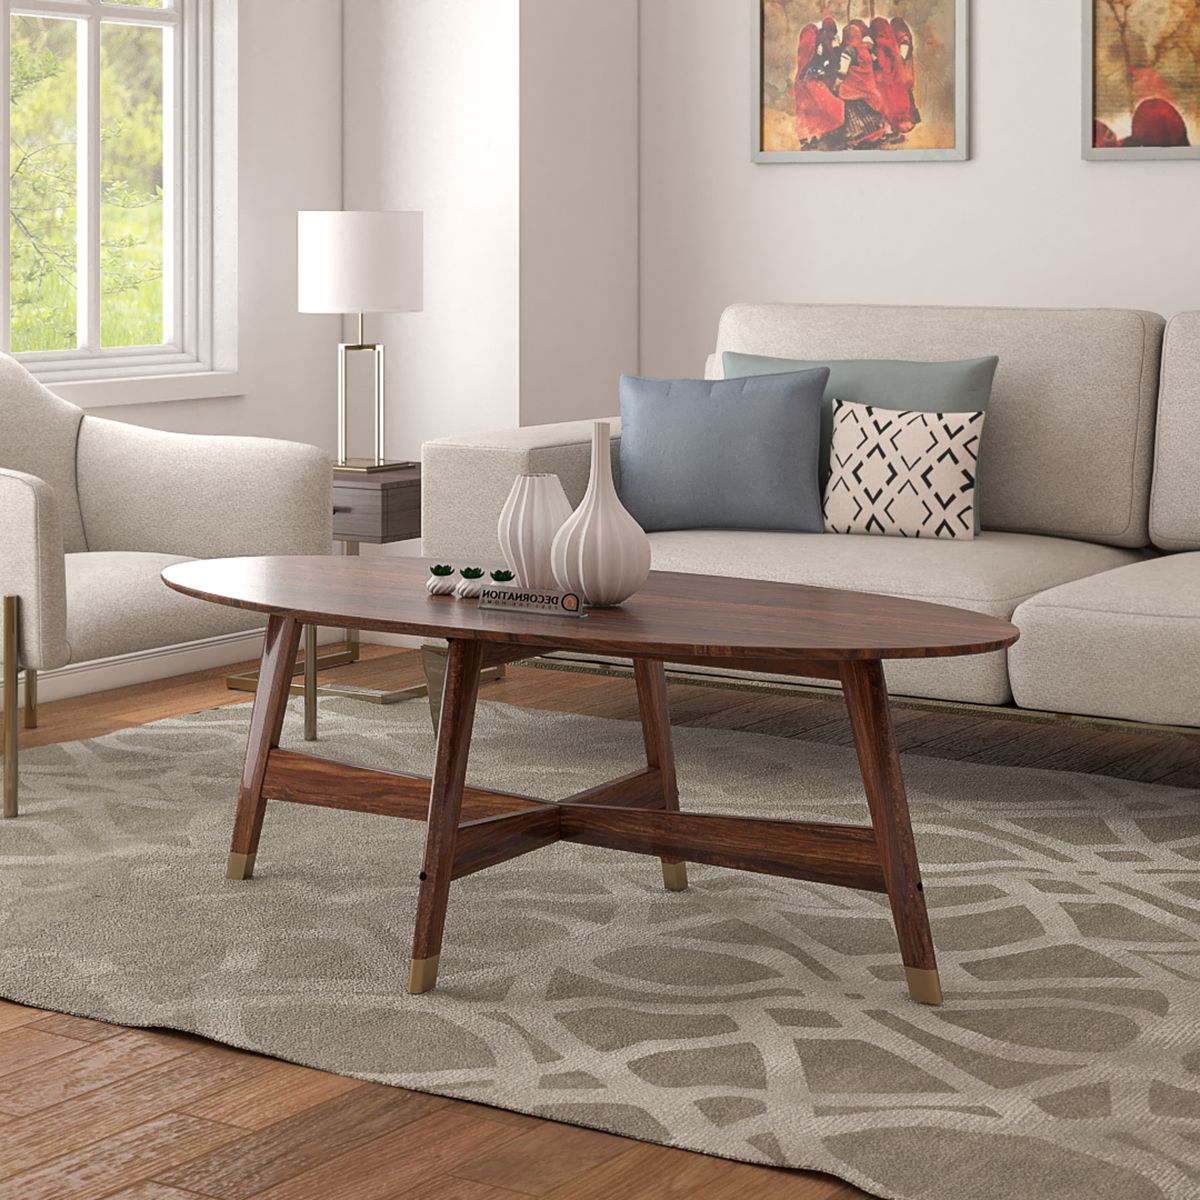 Birmingham Solid Wood Coffee Table – Natural Finish – Decornation With Regard To Famous Natural Stained Wood Coffee Tables (View 16 of 20)